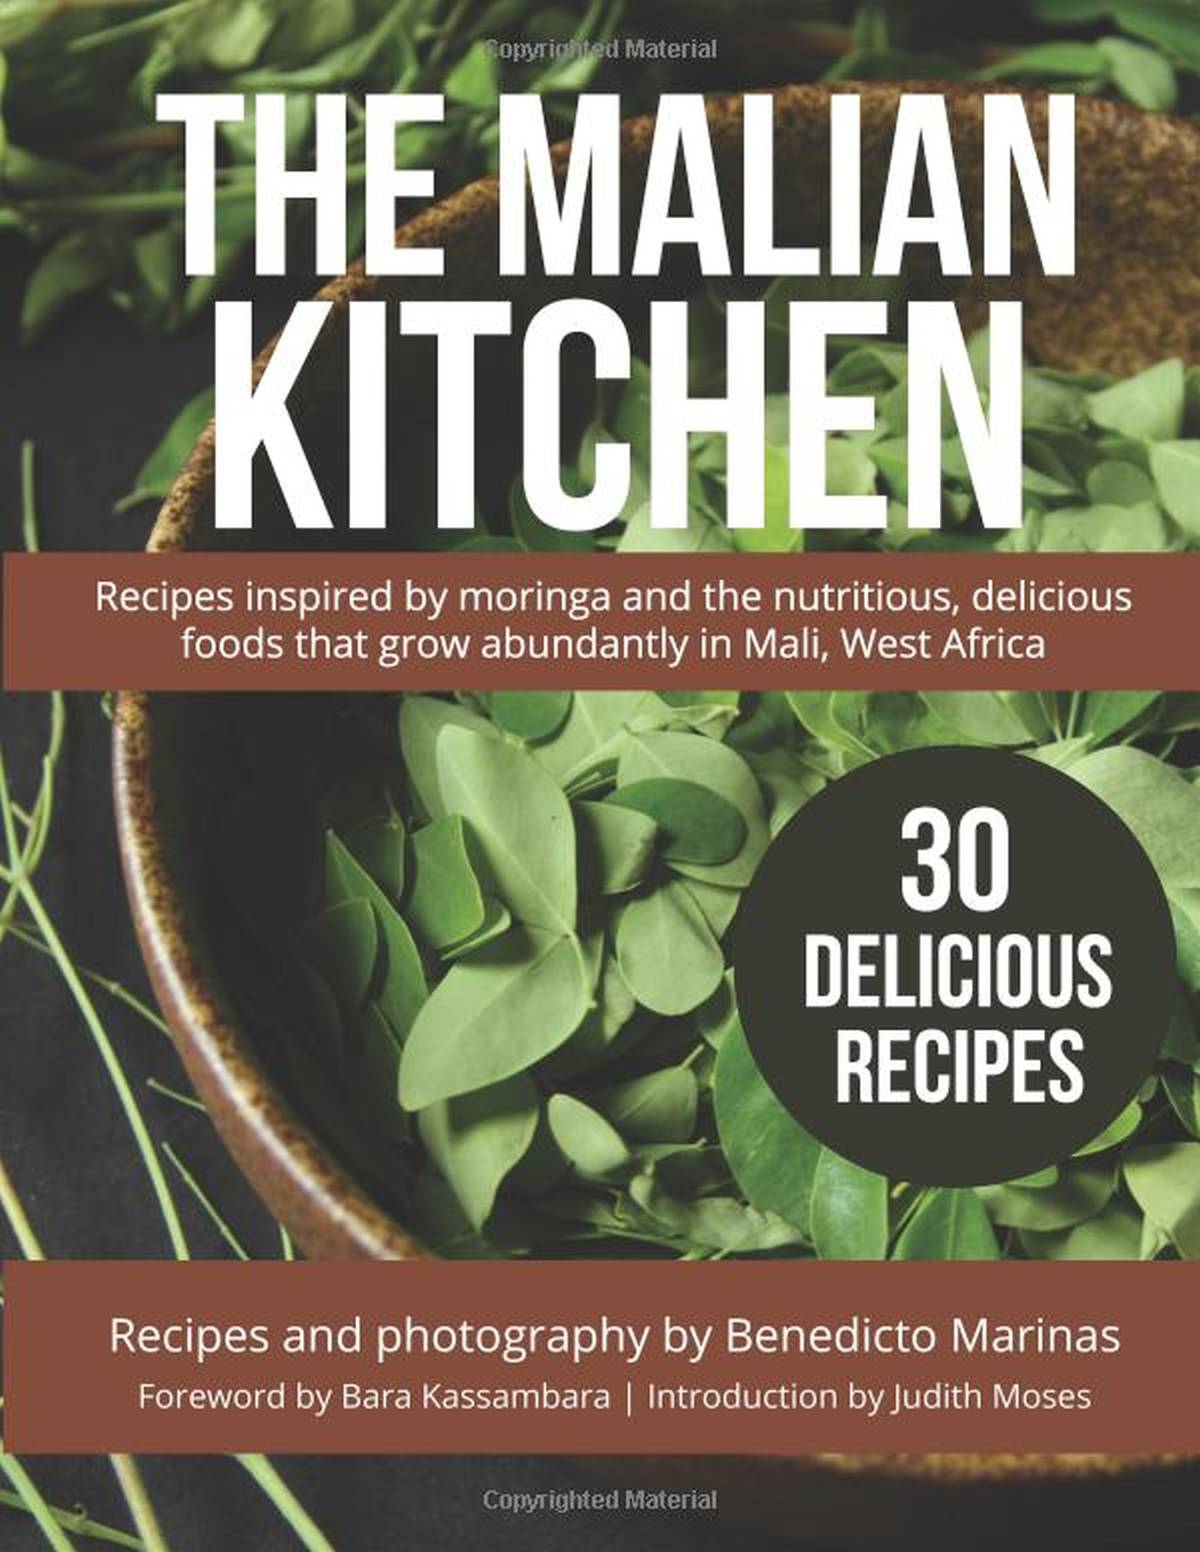 The Malian Kitchen: Recipes inspired by moringa and the nutritious, delicious foods that grow abundantly in Mali, West Africa